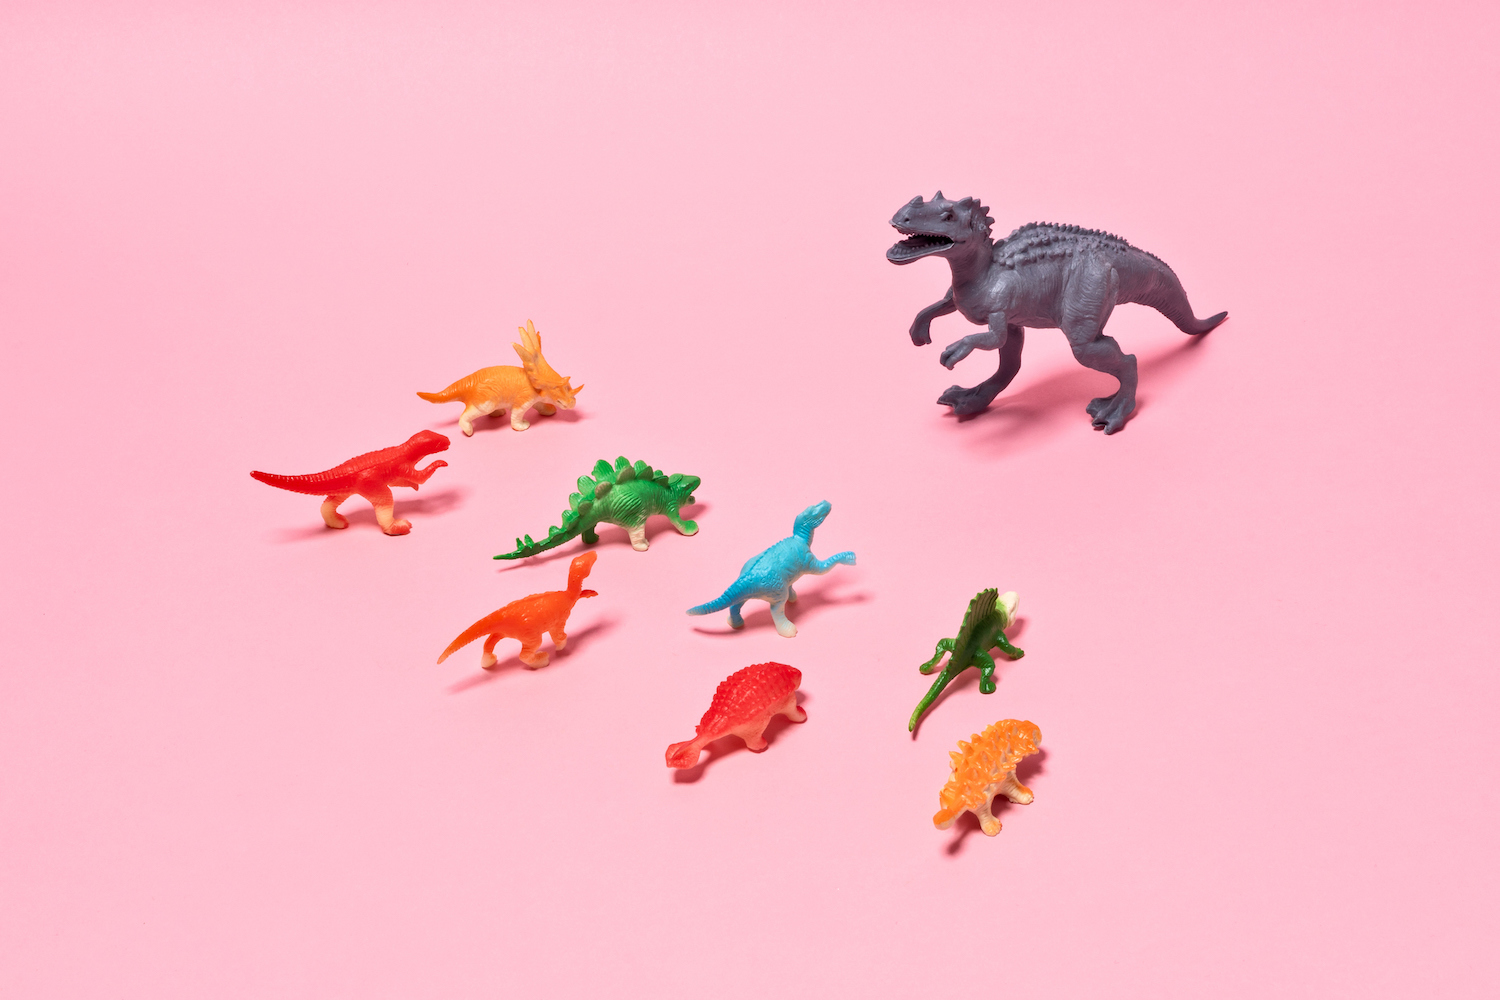 Toy Dinosaurs Confliction, Rex Dinosaur Standing Out From the Crowd on Pink Background.